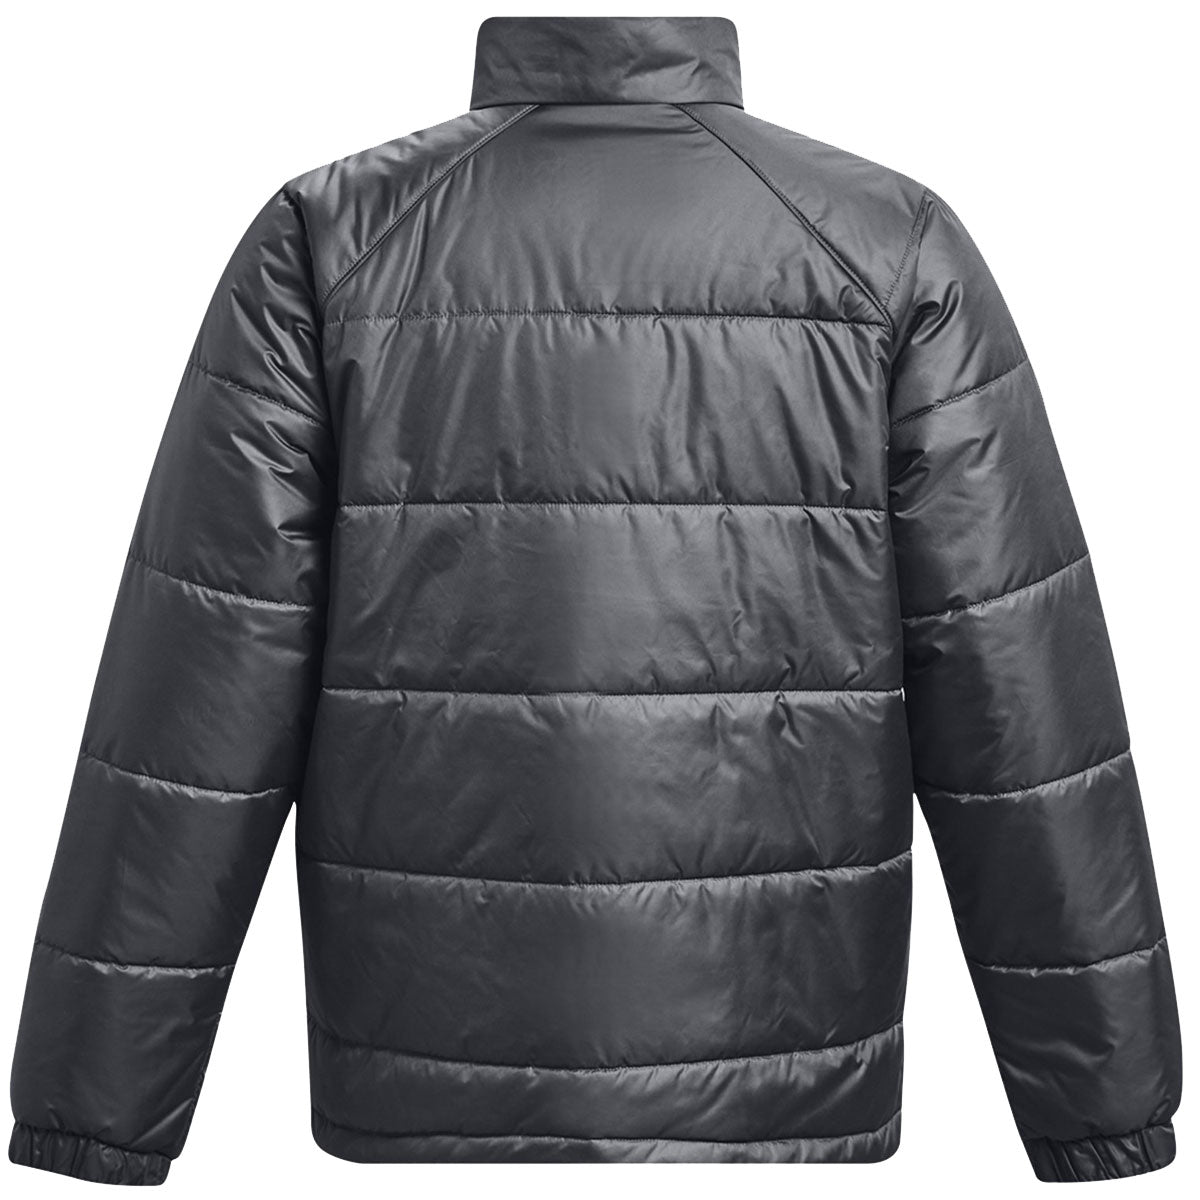 Under Armour Storm Insulated Jacket - Mens - Pitch Grey/Black